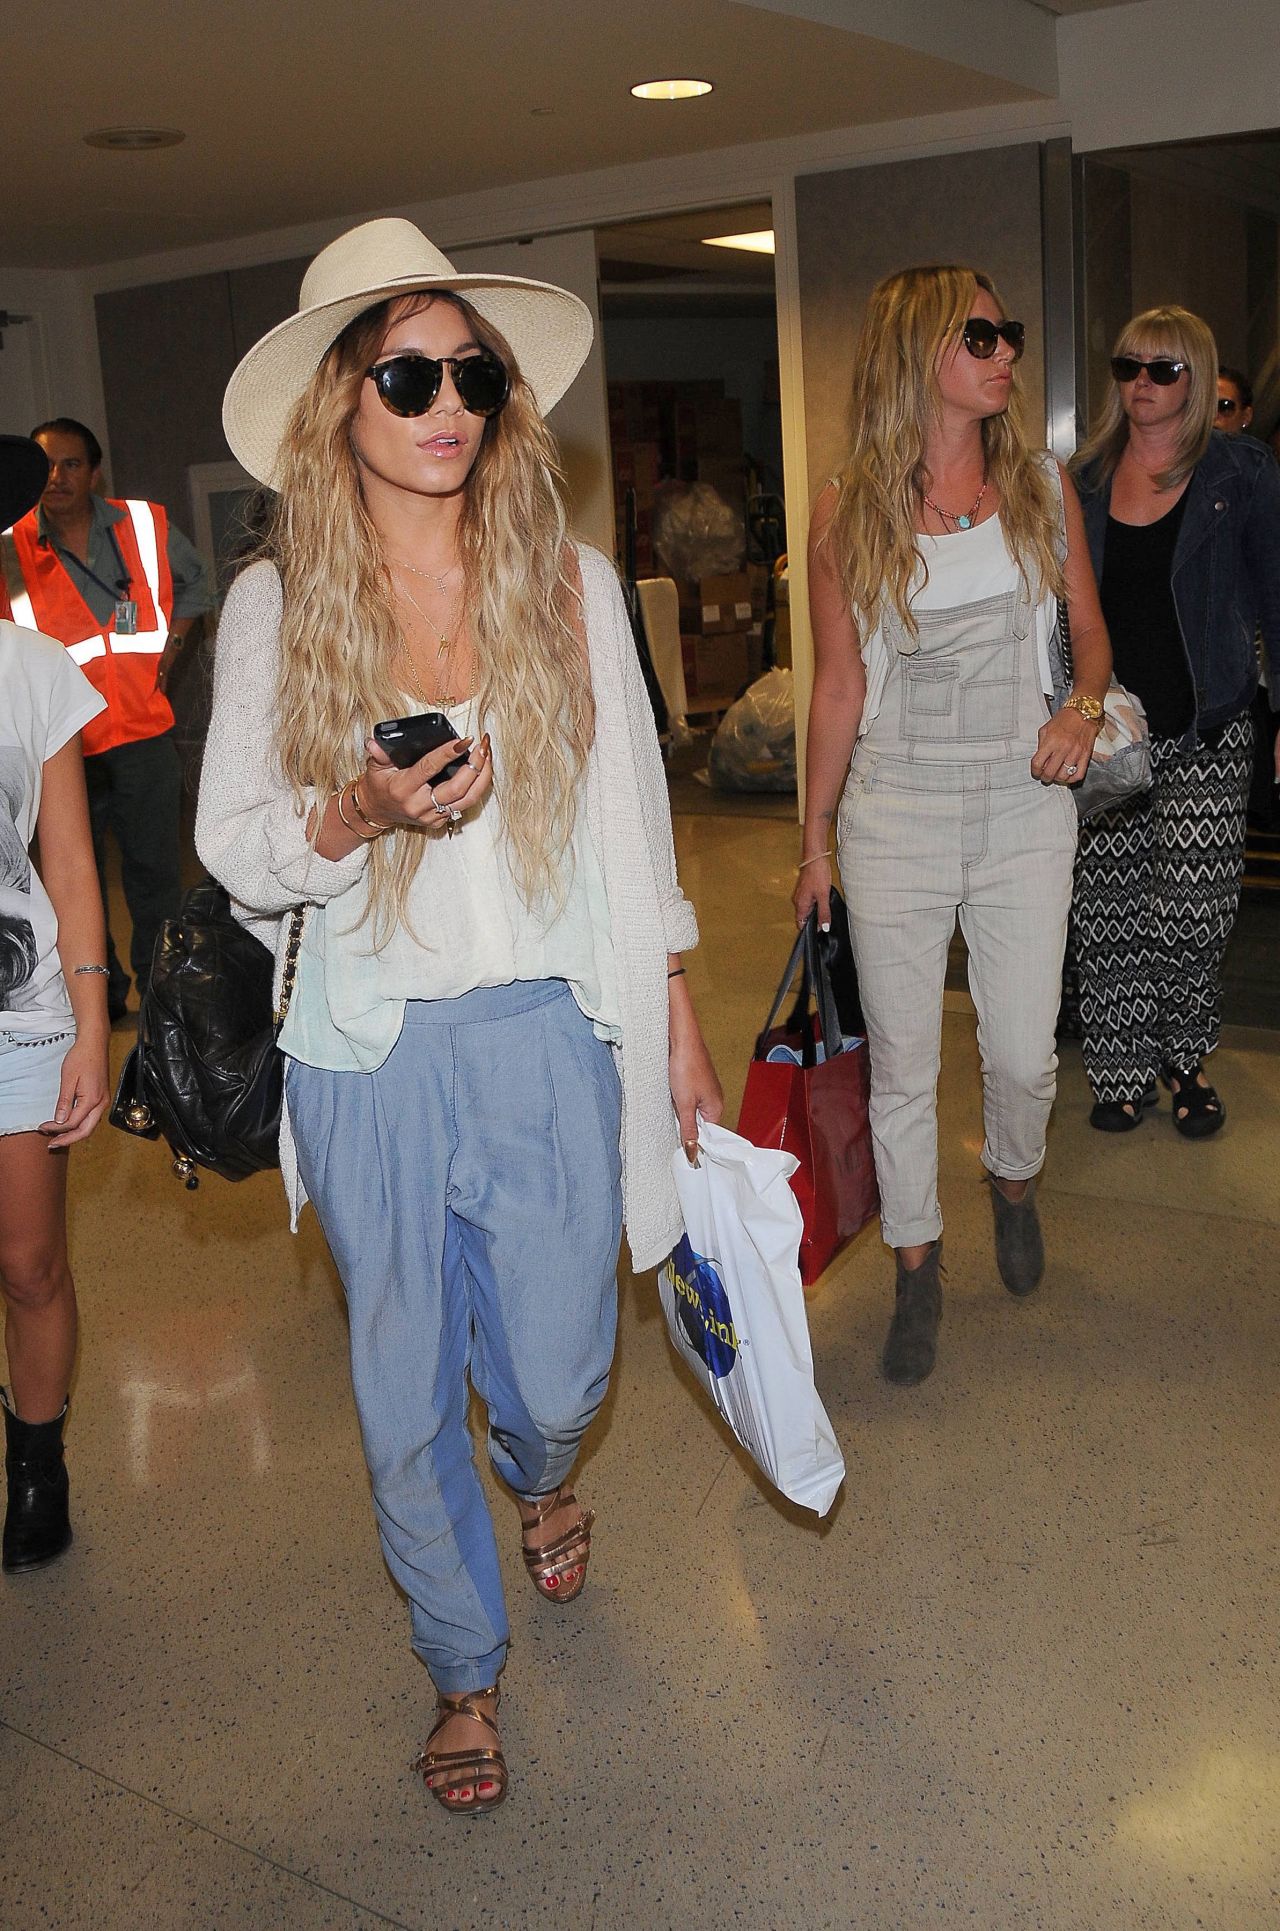 Ashley Tisdale Arrives at LAX Airport November 20, 2012 – Star Style